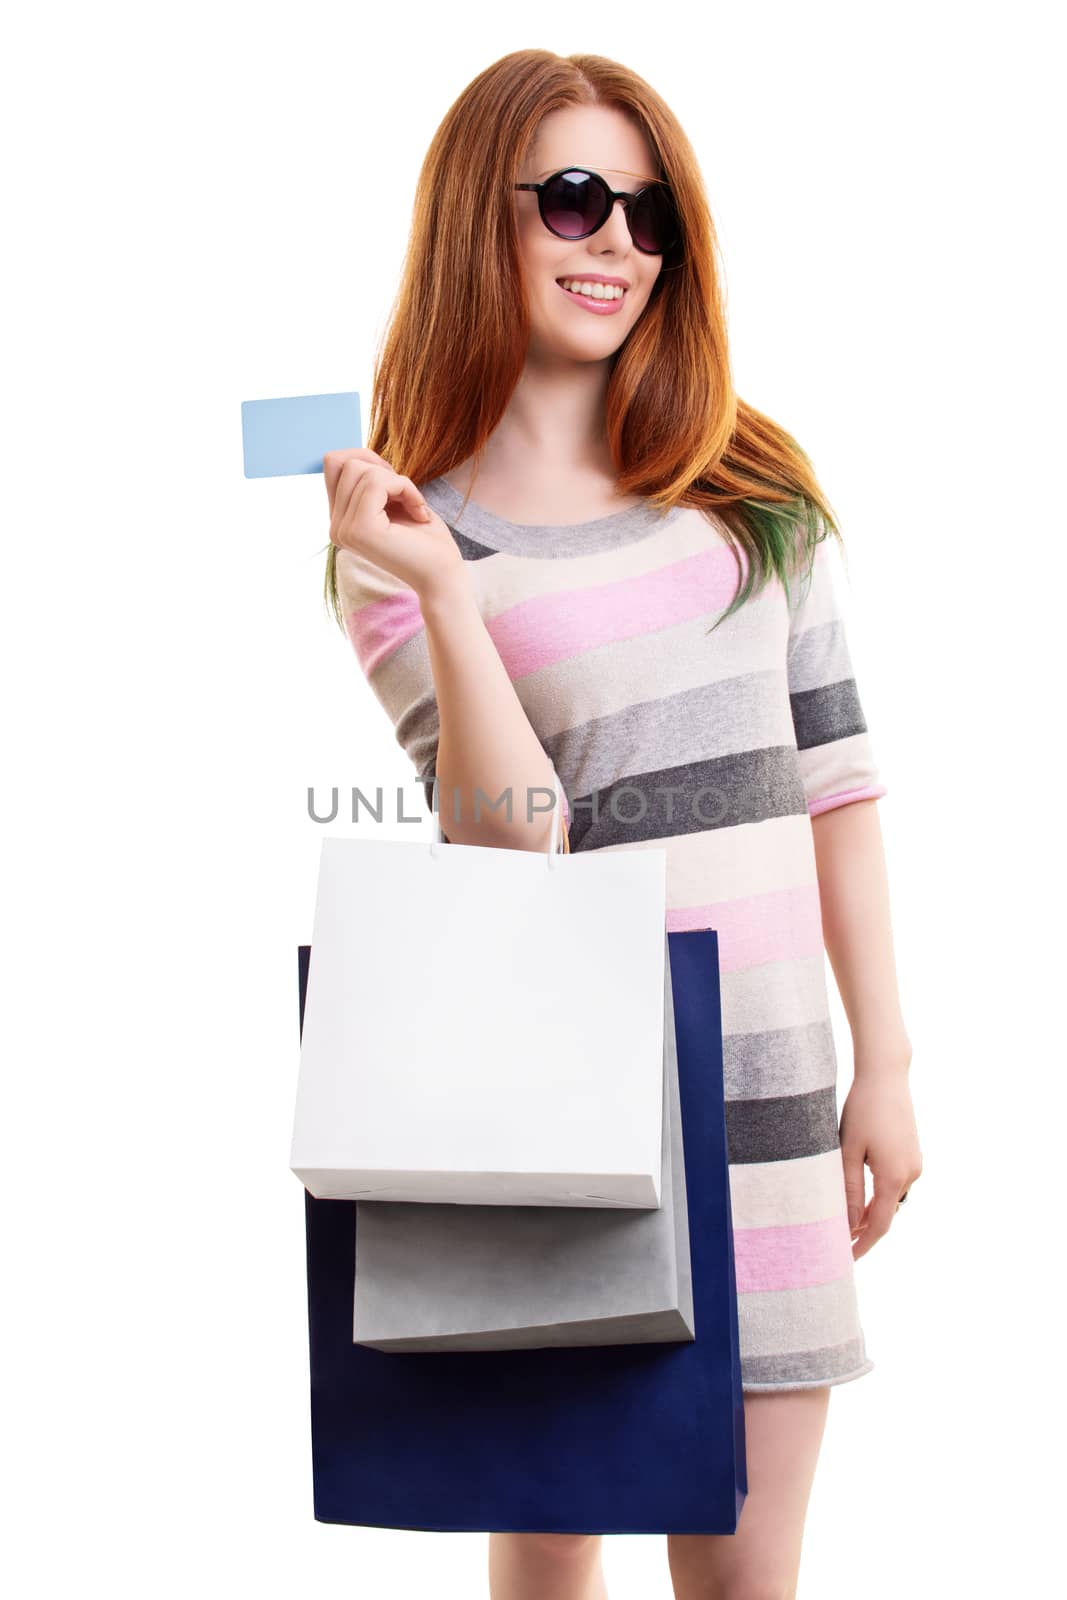 Smiling girl holding shopping bags and a blank card by Mendelex